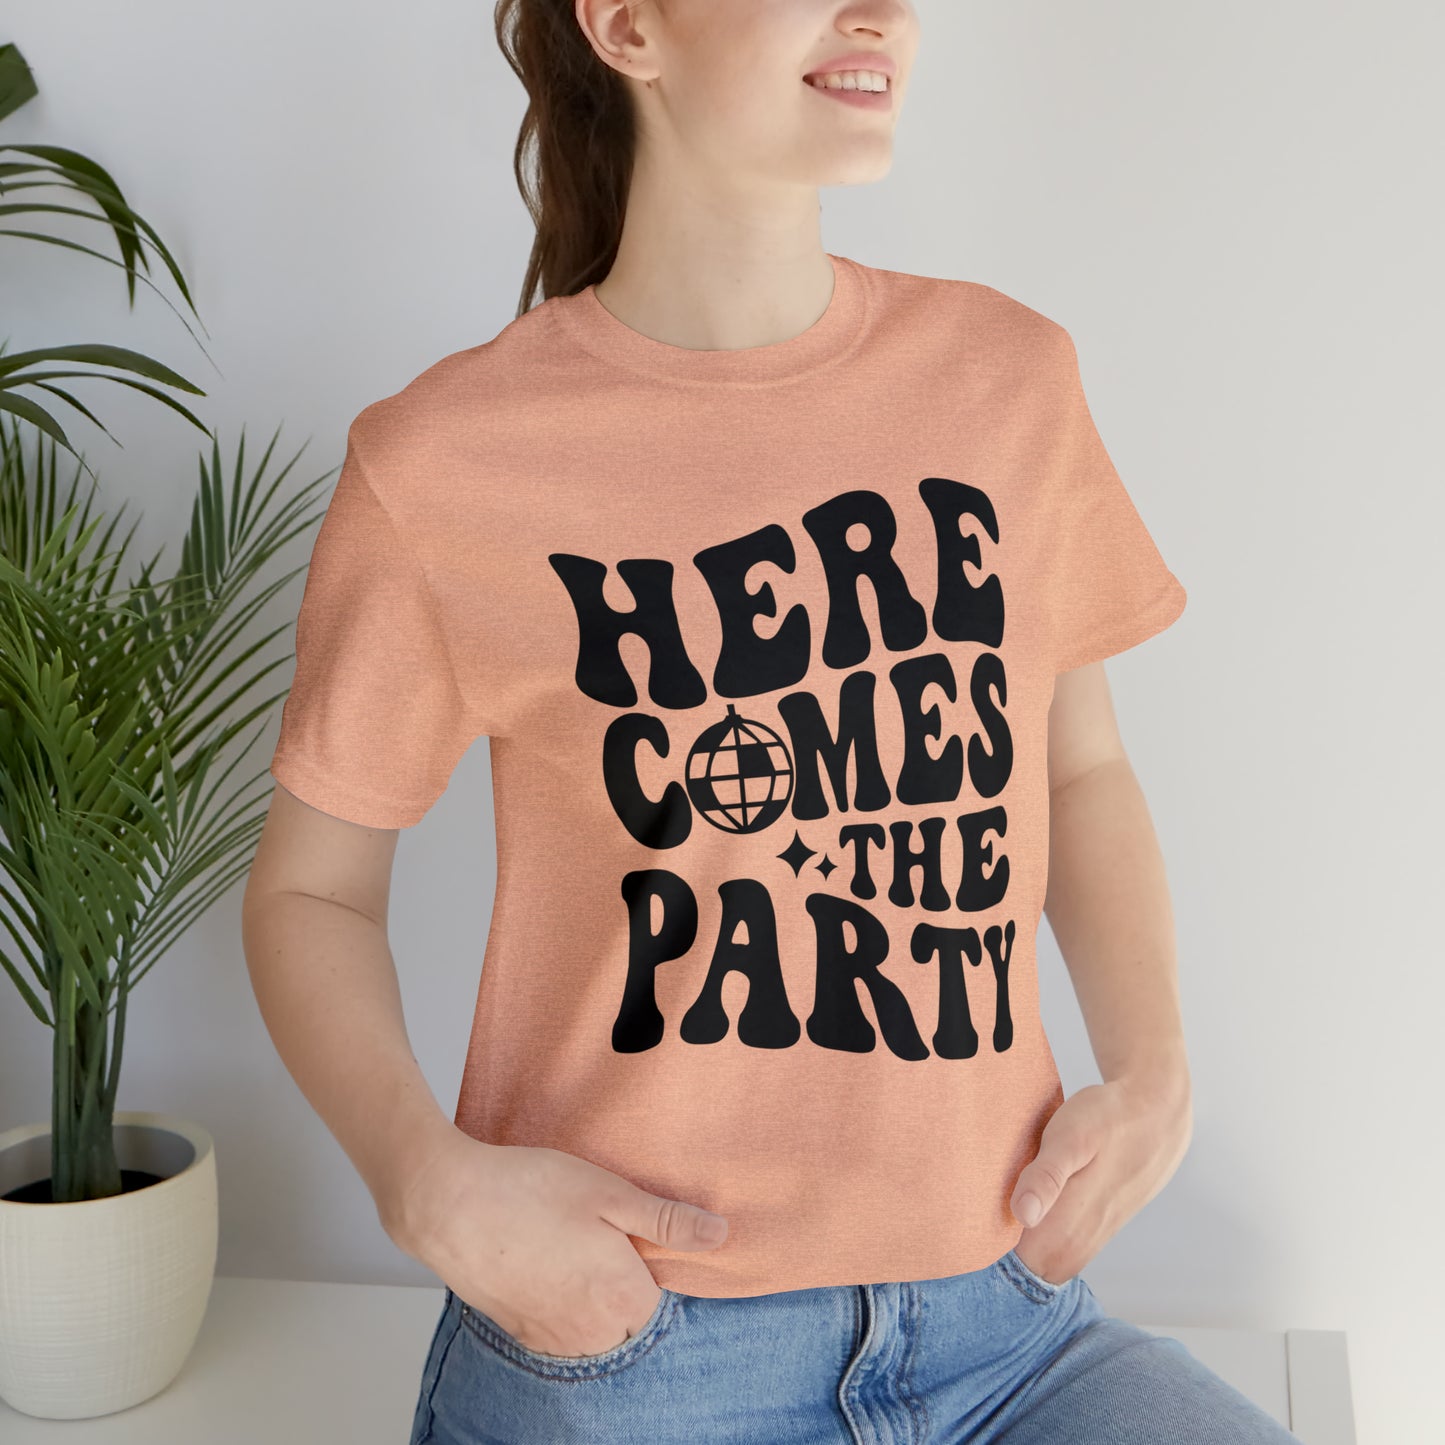 Here Comes the Party Bachelorette T-Shirt